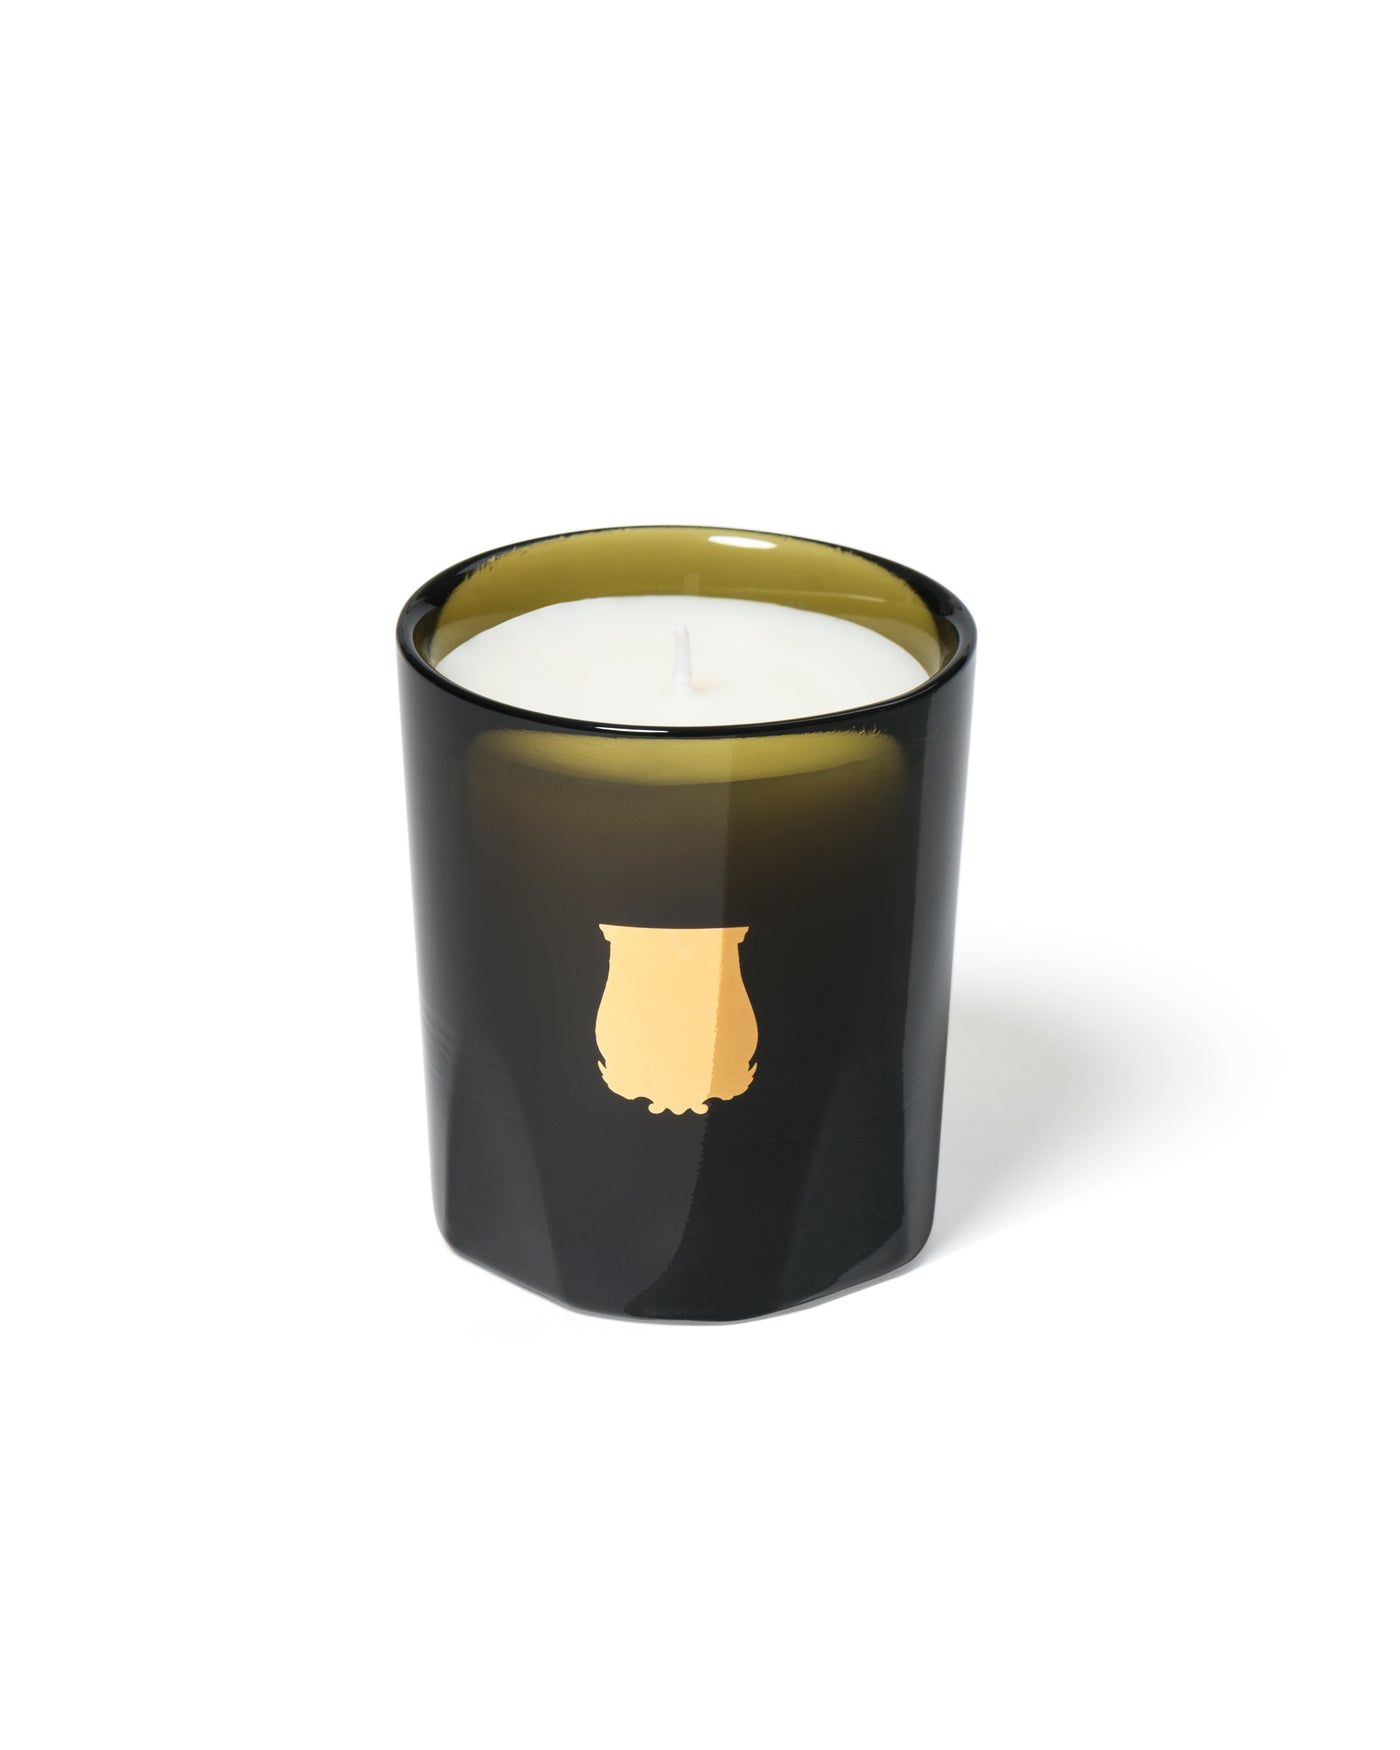 Odalisque 70gm CLASSIC CANDLES green box